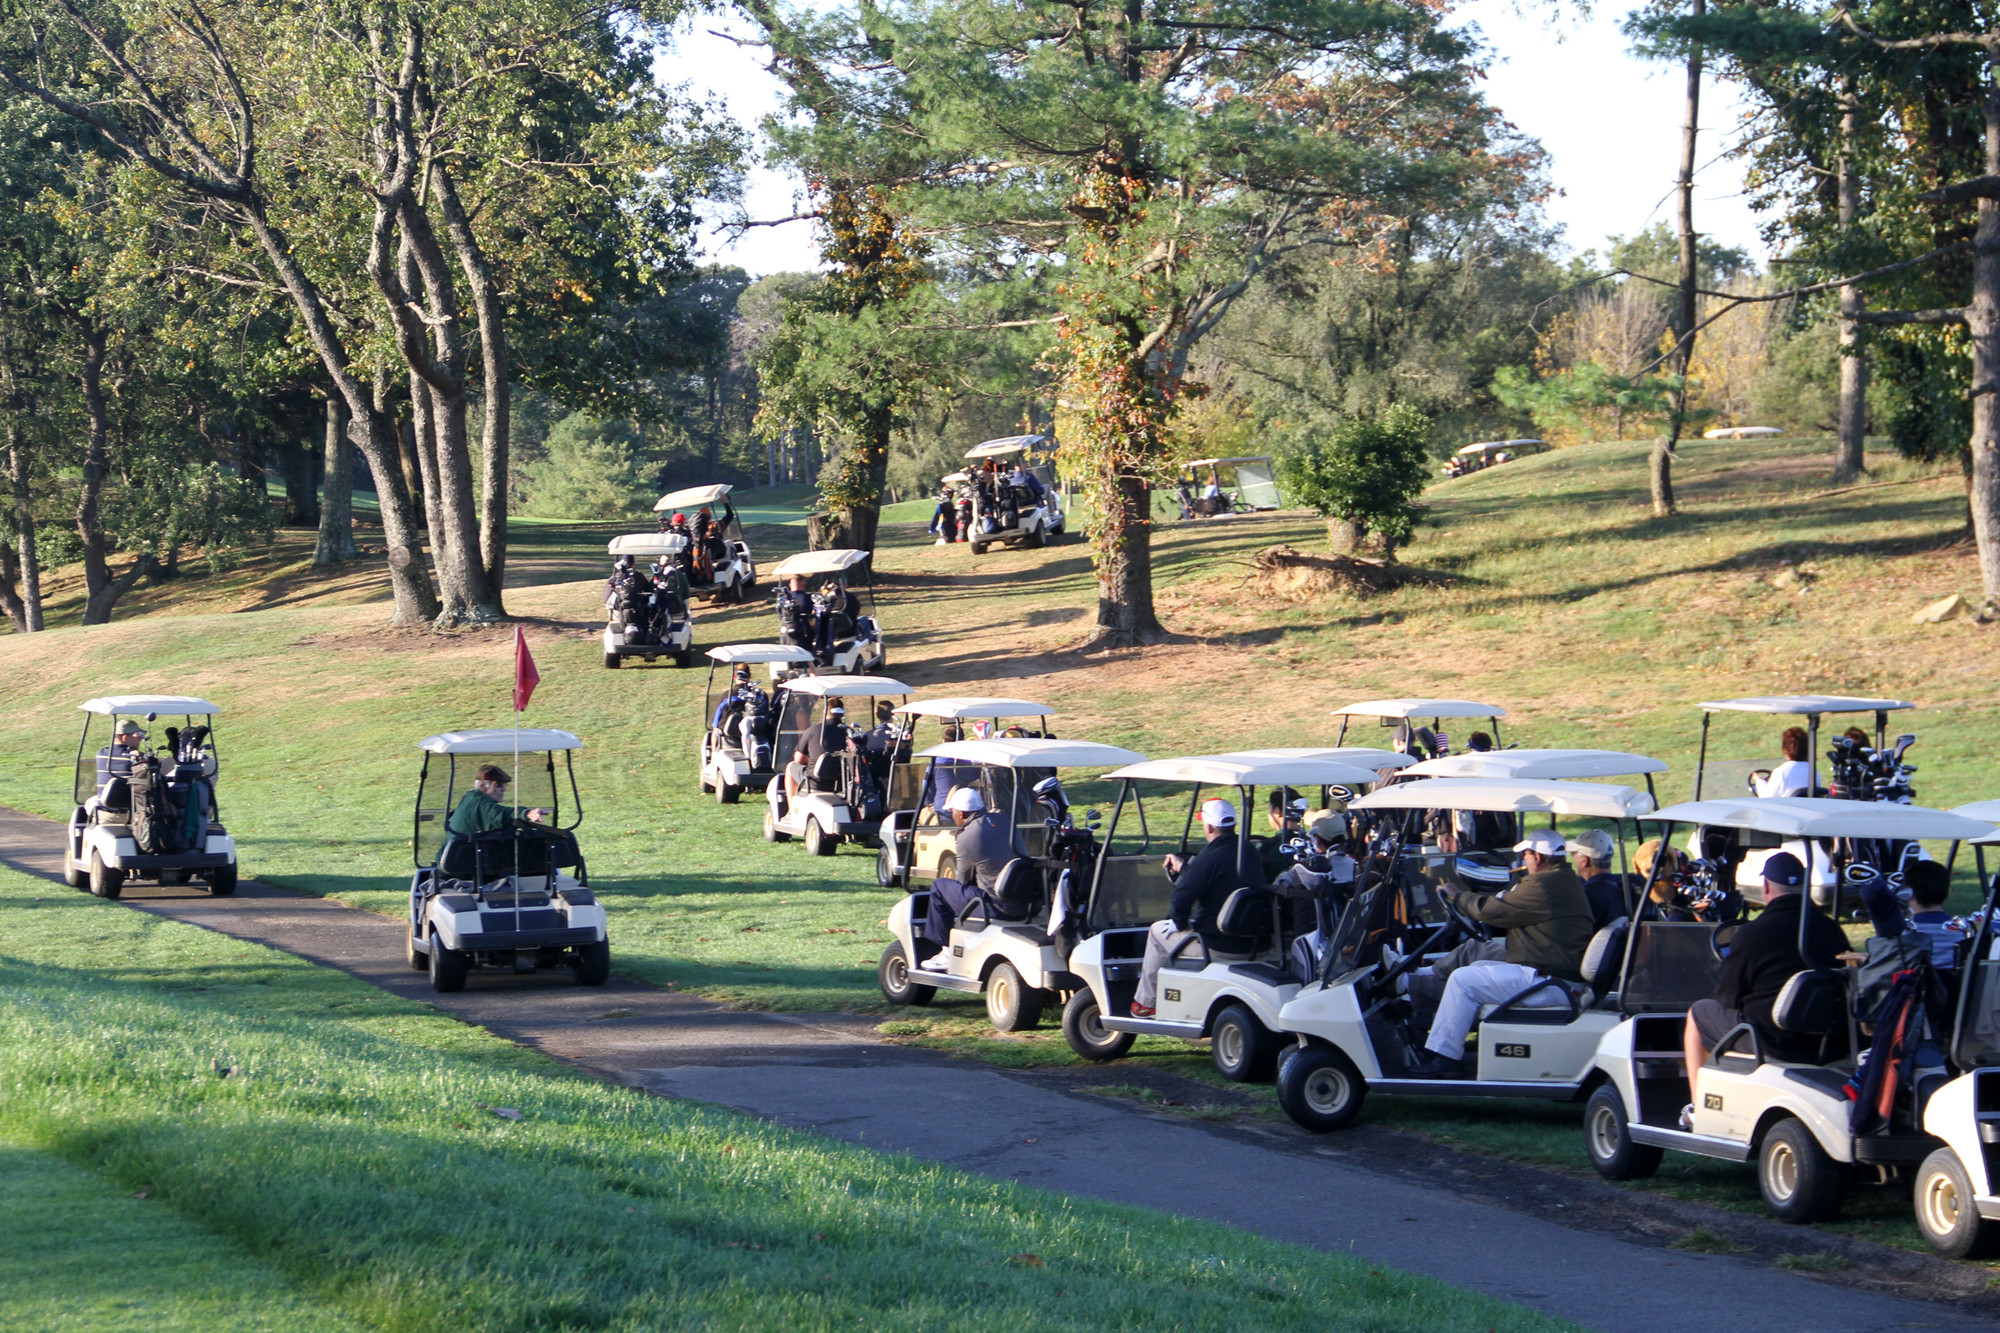 Golfers begin their day at the Douglas Golf Course for the eighth annual Johnny LaBarbera Golf Outing on Oct. 14.